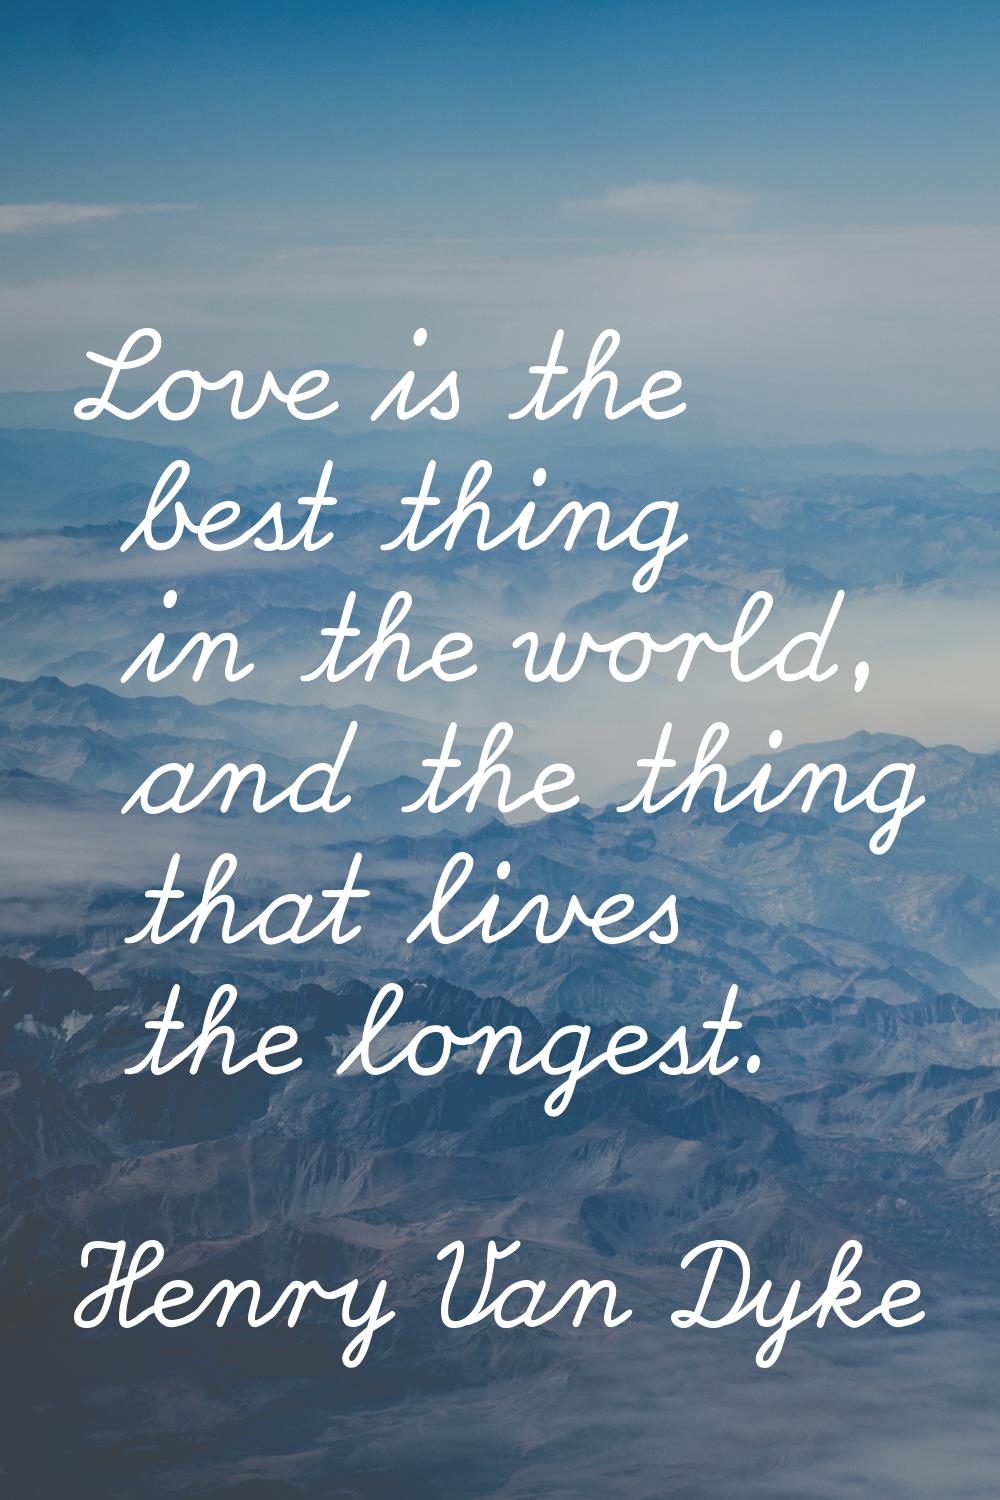 Love is the best thing in the world, and the thing that lives the longest.